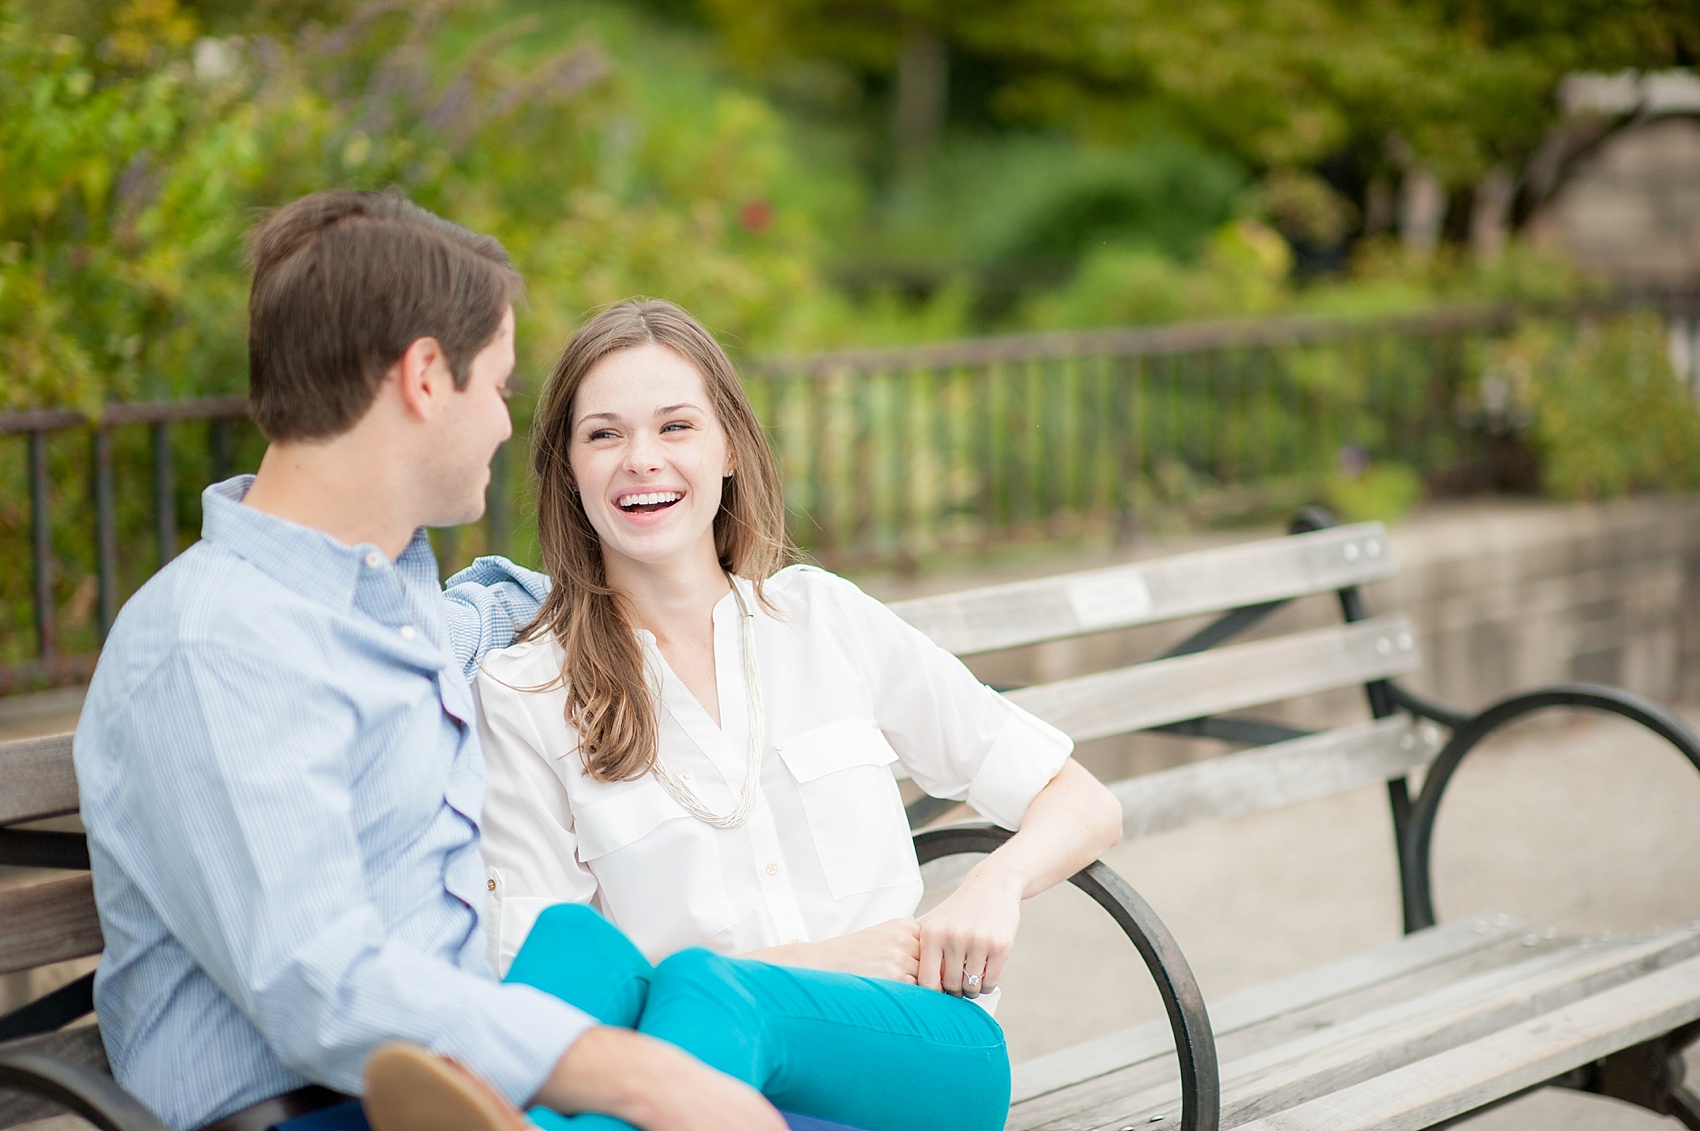 NYC engagement photos by Mikkel Paige Photography at the Upper East Side's Carl Schurz Park.